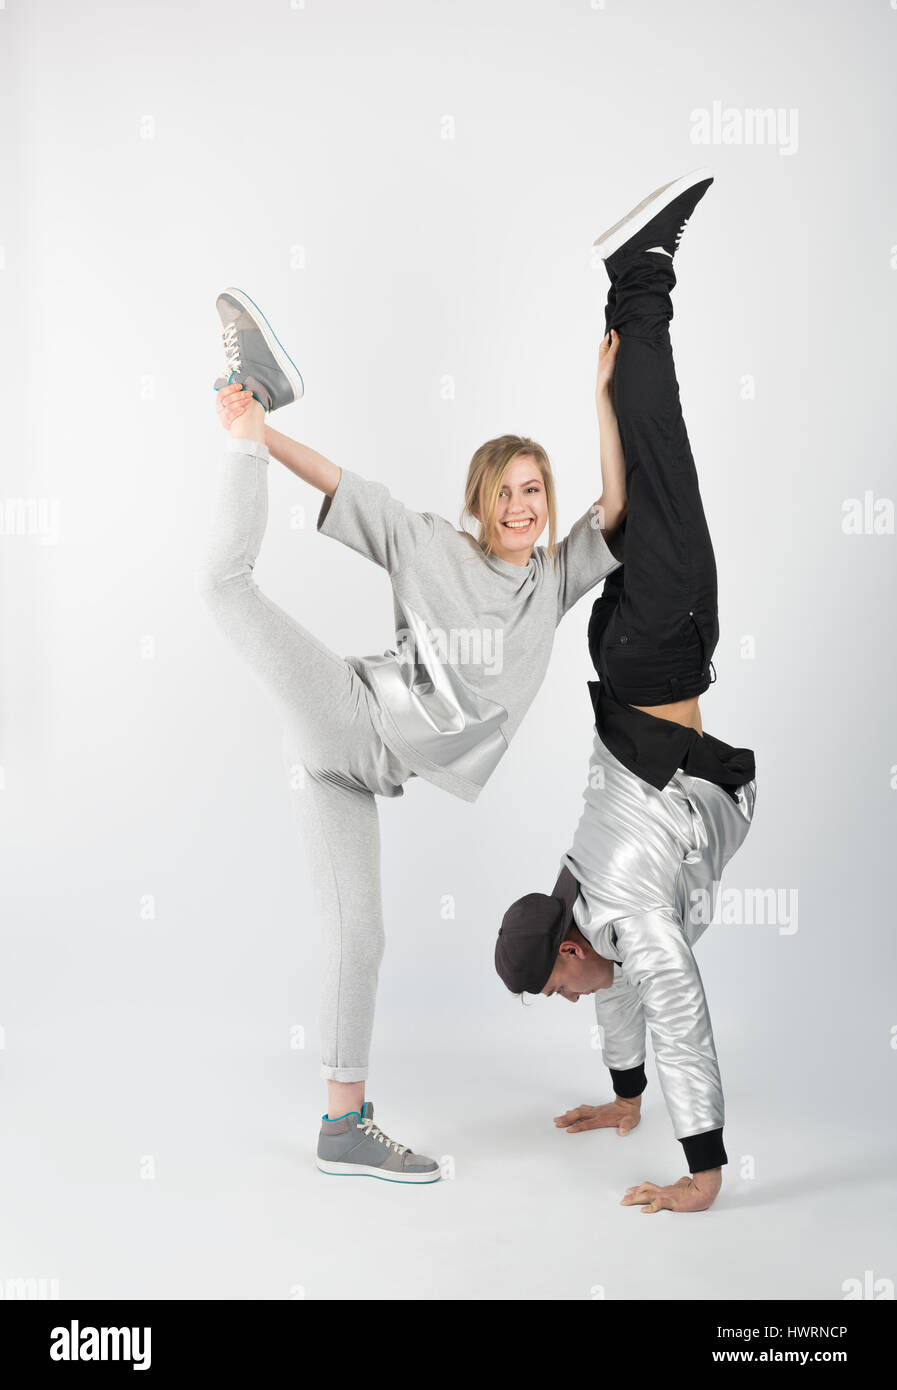 Cheerful couple having fun posing in studio. He stands on his hands and she arched her body and lifted her leg upward. Flexibility and stretching Stock Photo